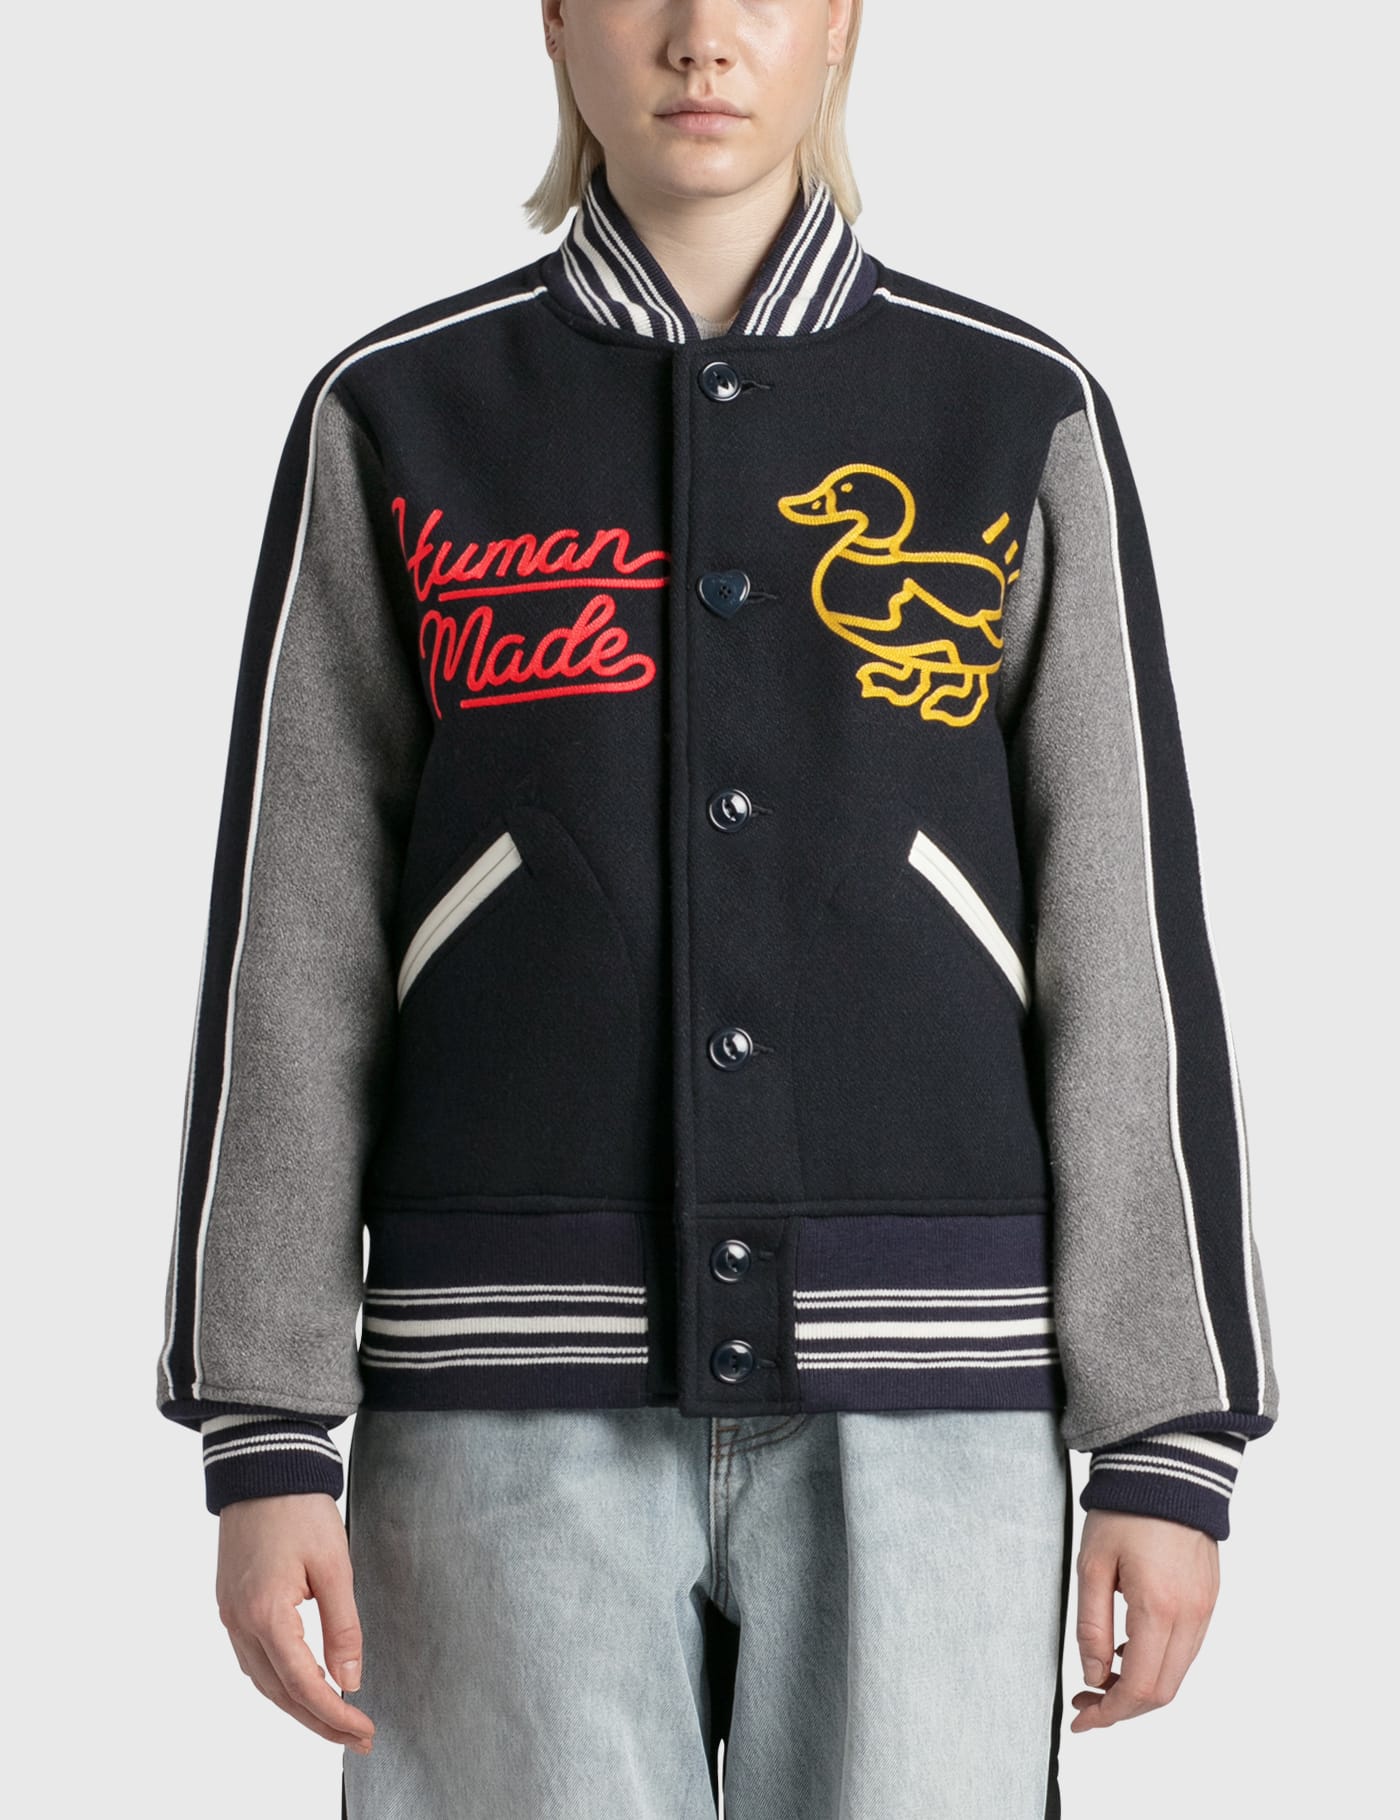 Human Made - Varsity Jacket | HBX - Globally Curated Fashion and Lifestyle  by Hypebeast